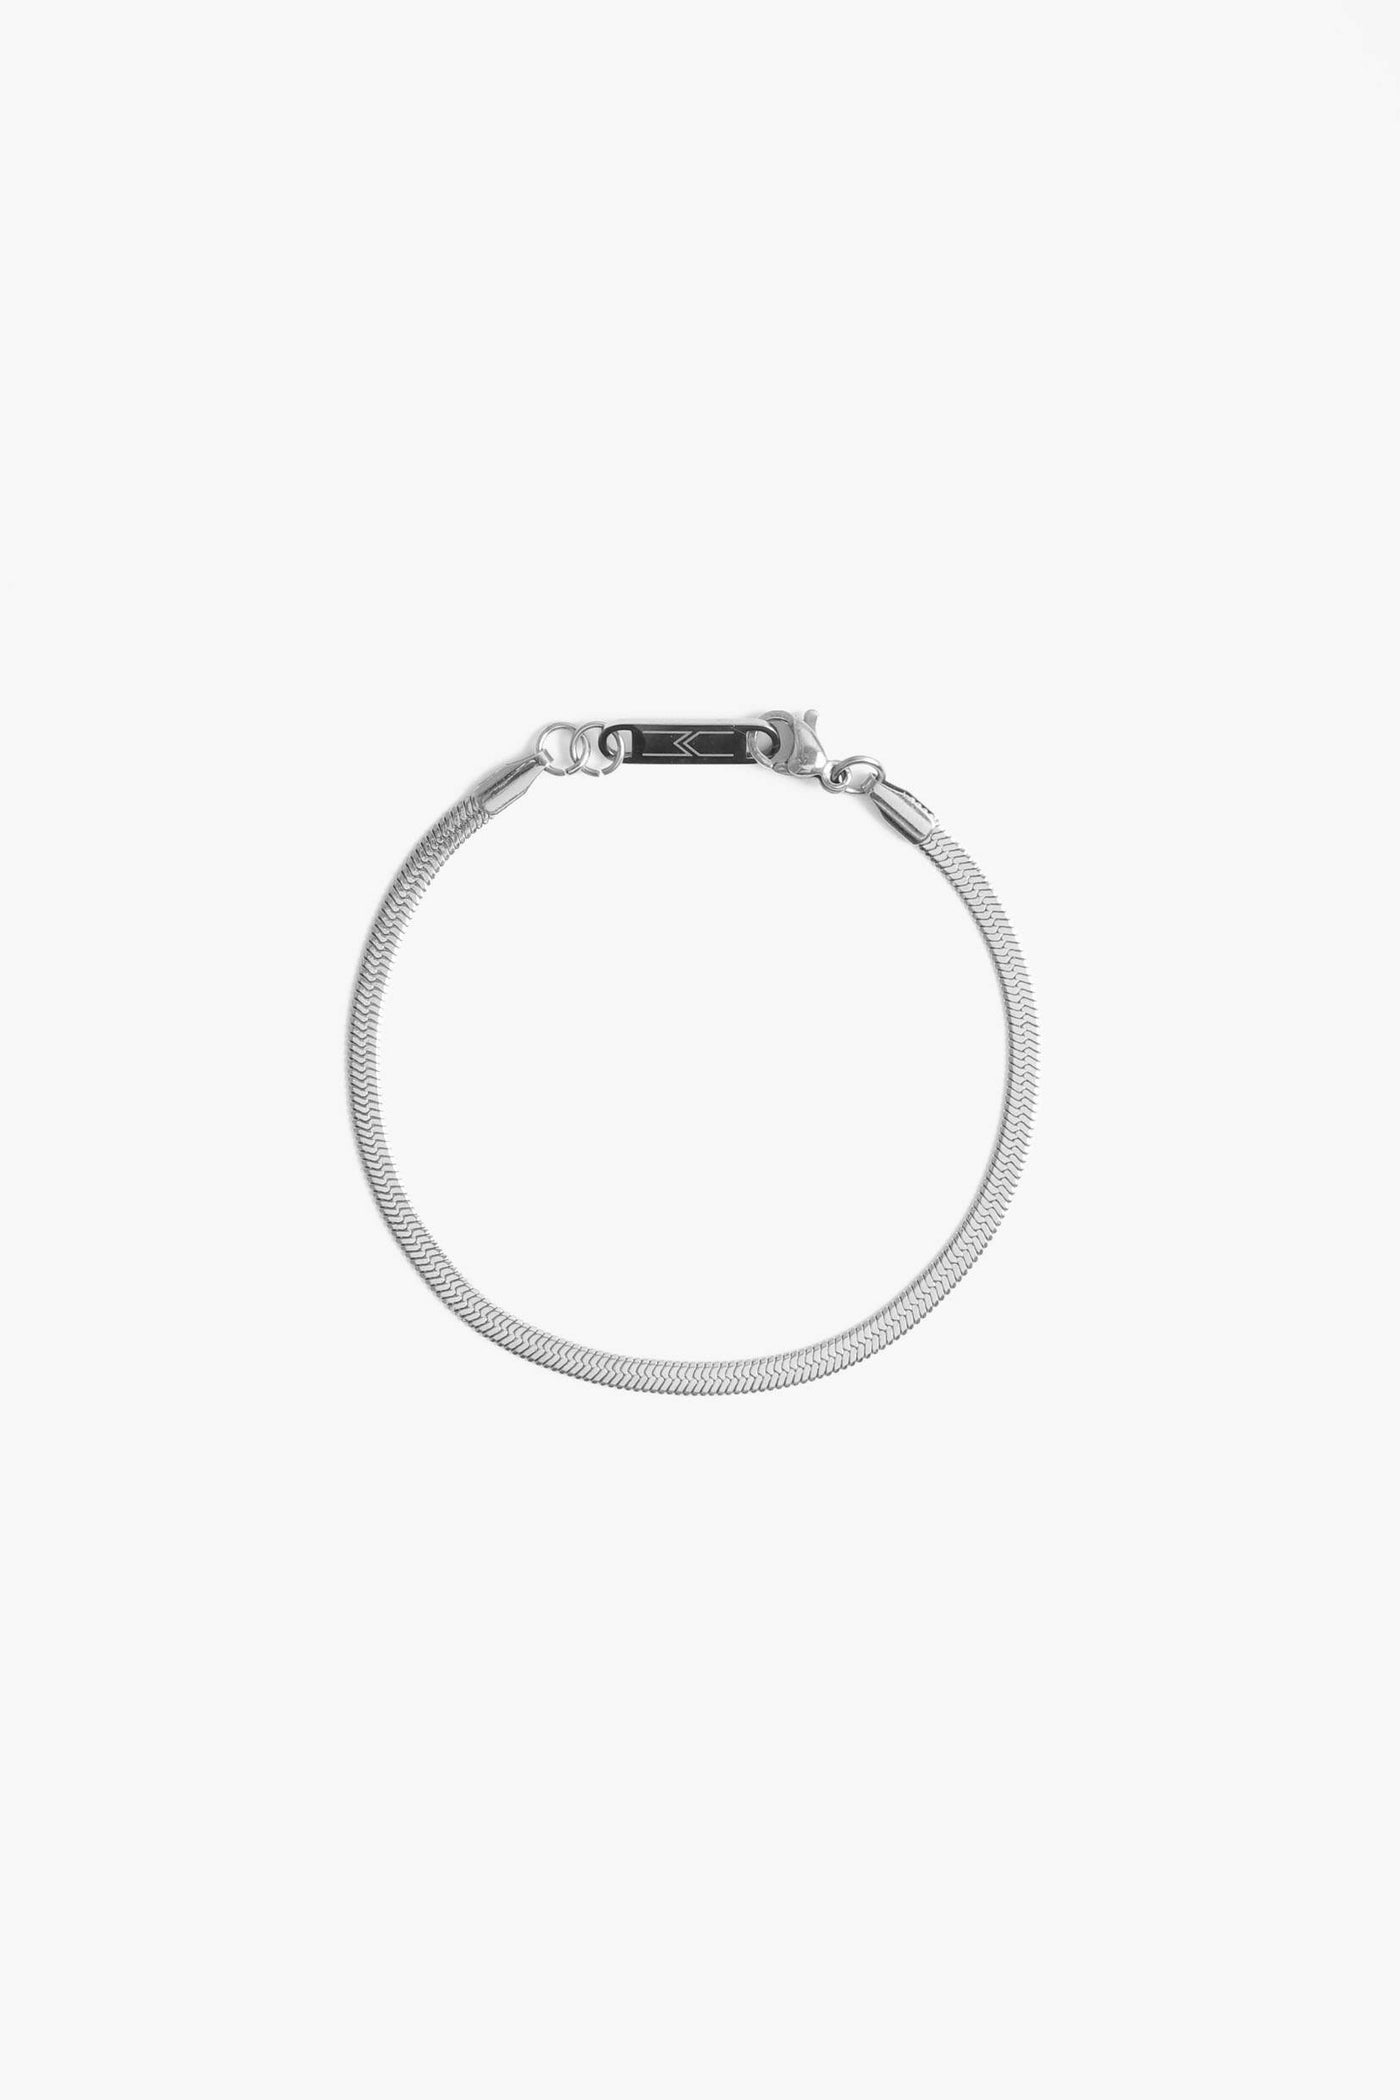 Marrin Costello Jewelry 3mm thick herringbone snake chain bracelet with lobster clasp closure. Waterproof, sustainable, hypoallergenic. Polished stainless steel.